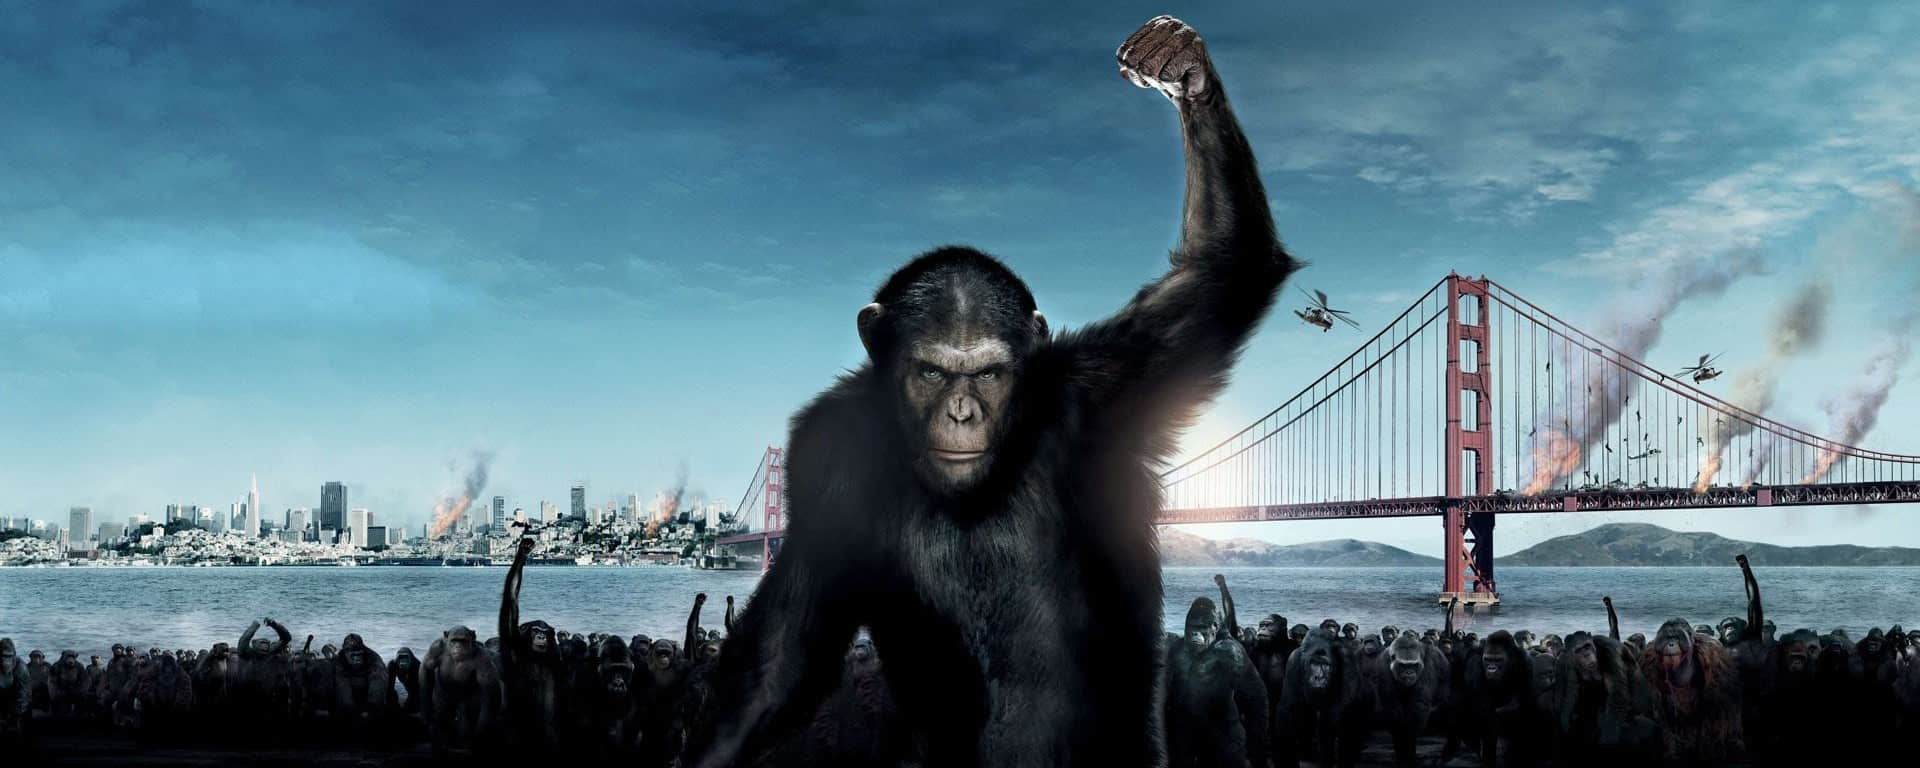 Rise of the Planet of the Apes 4K 2011 big poster